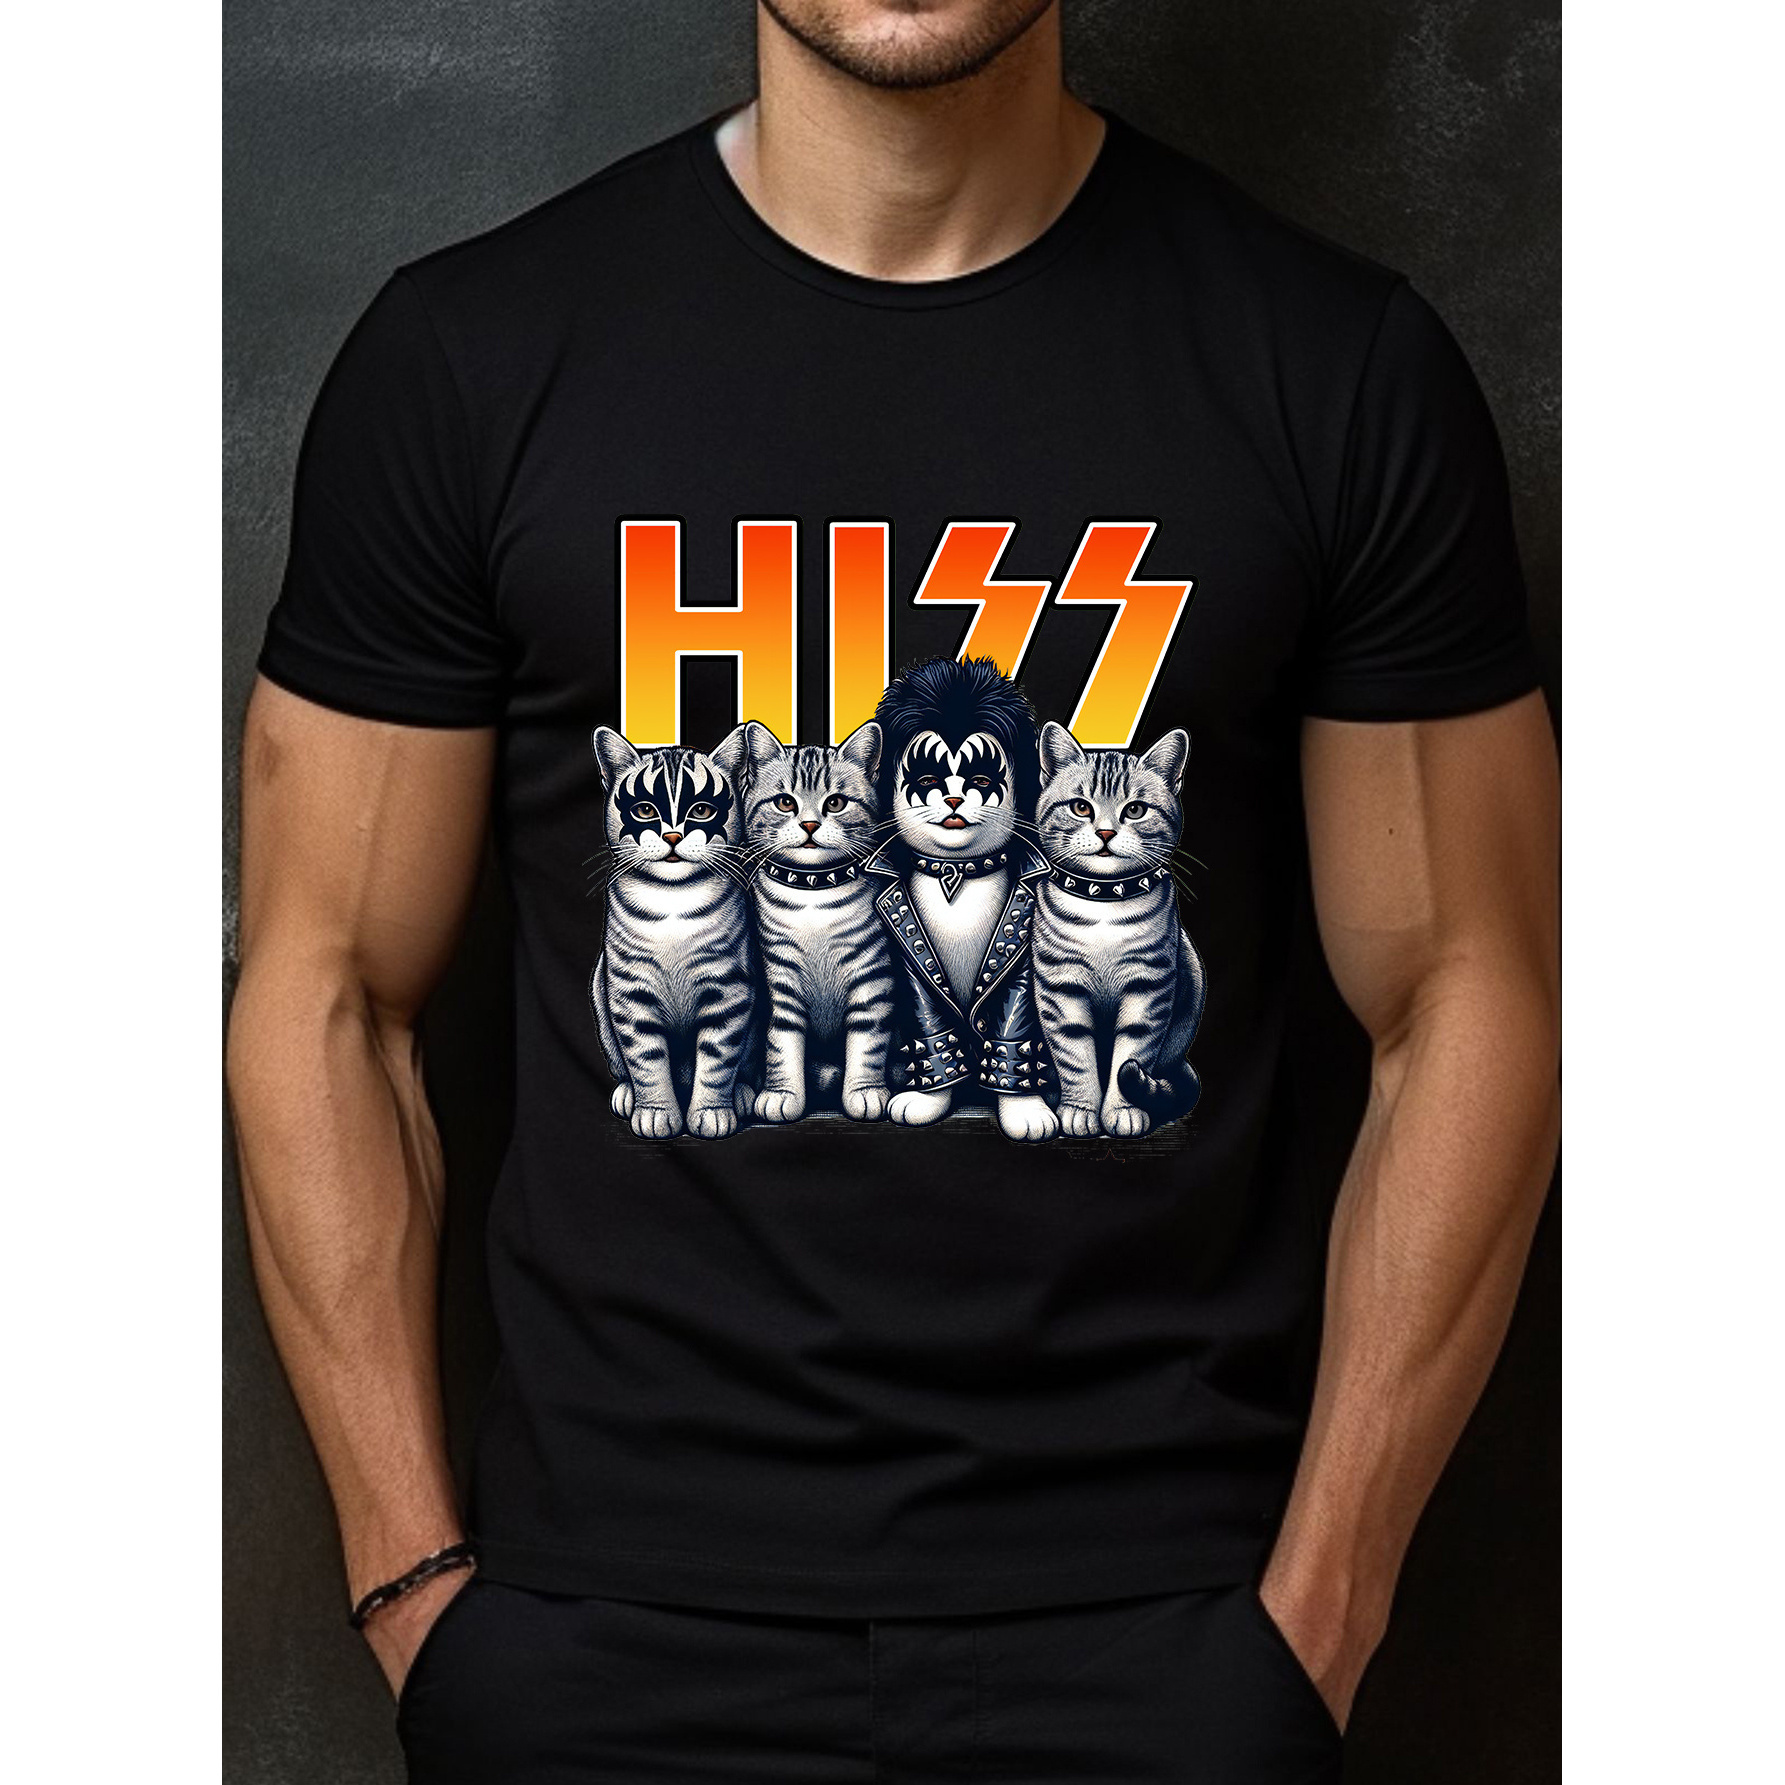 

Cotton T-shirt-bold Graphic Design, Men's Short Sleeve, Super Comfortable, Suitable For Summer And All Seasons, Hissing Funny Cat